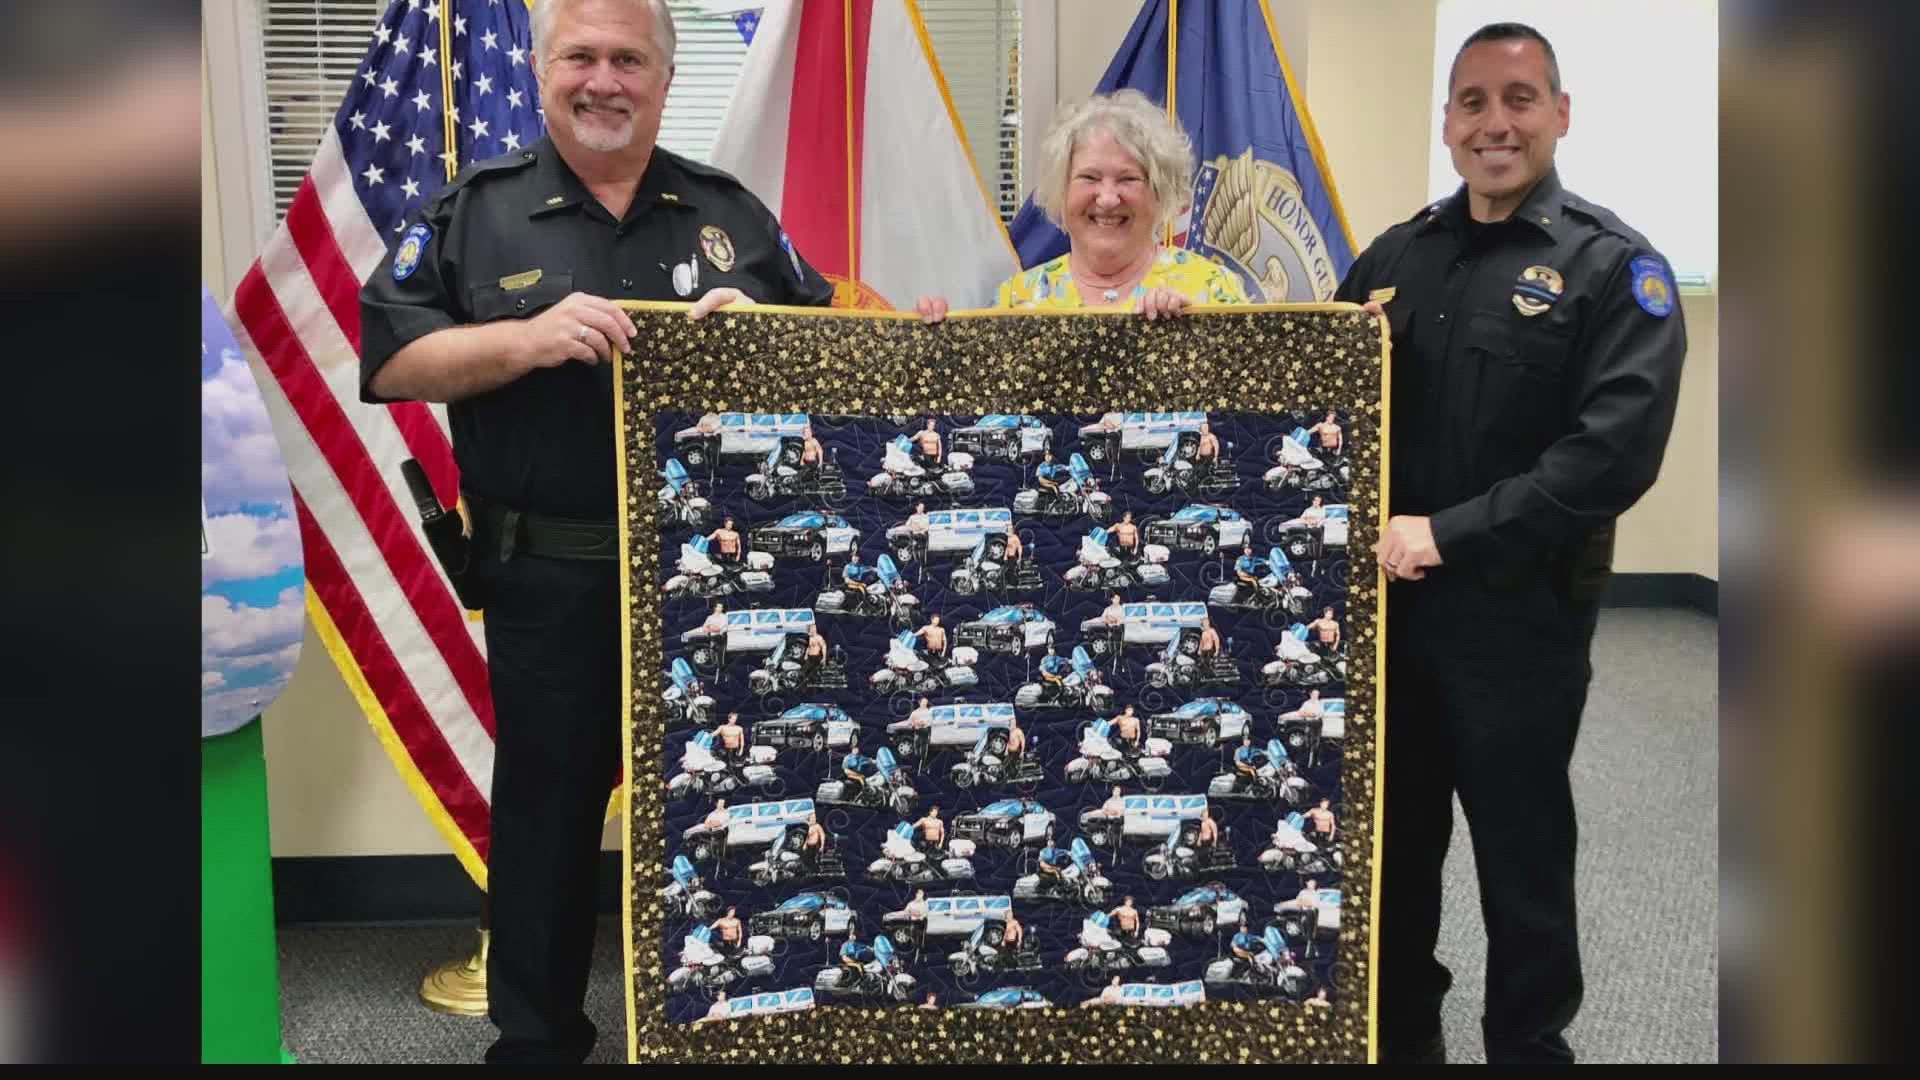 FBPD was gifted a special quilt with shirtless police officers on it.